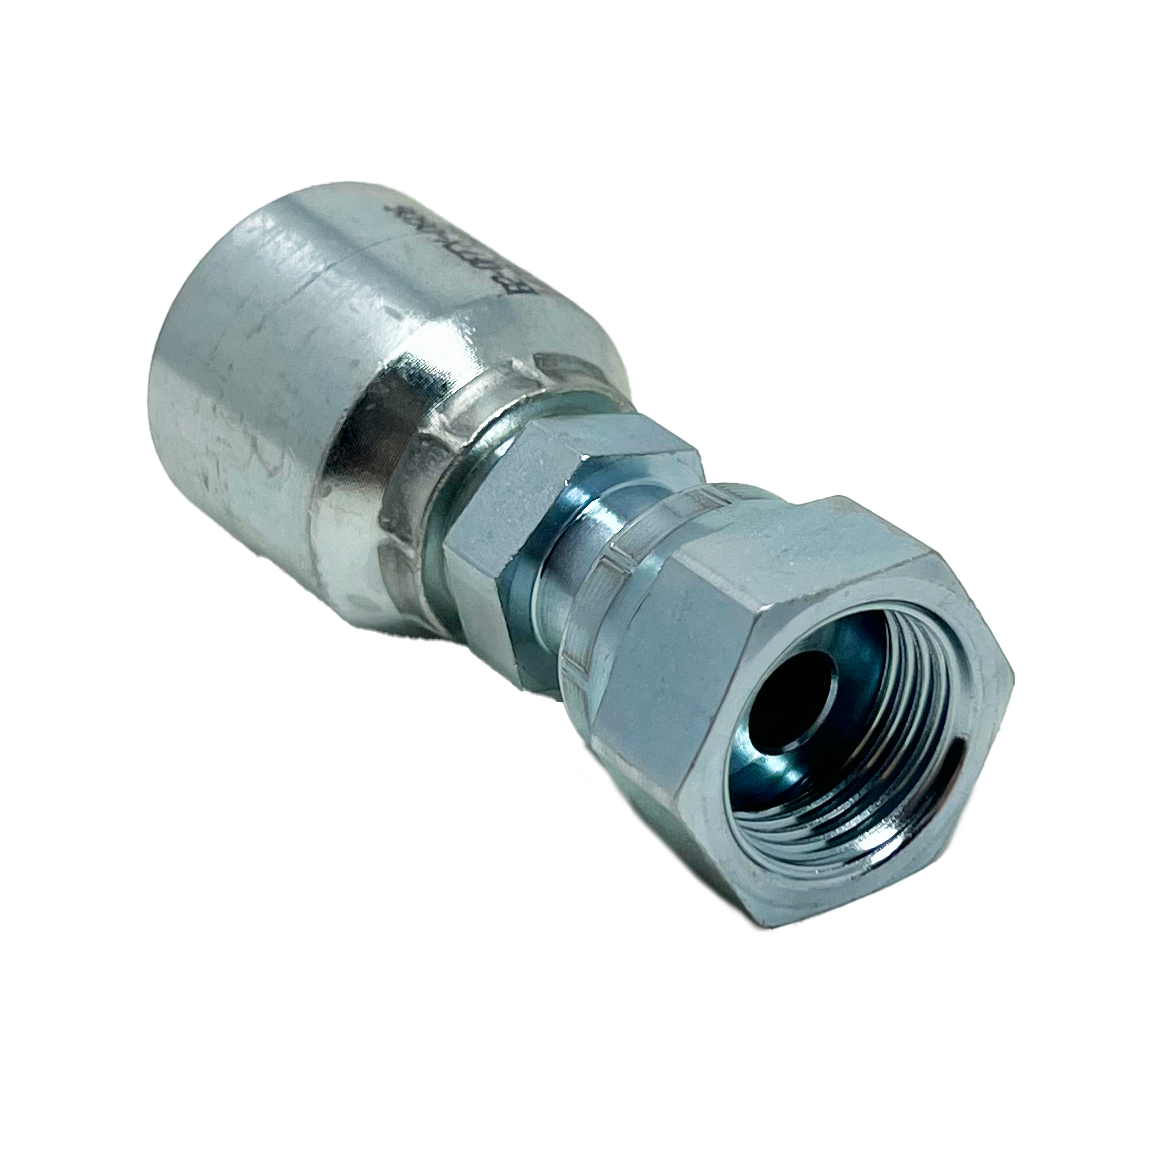 B2-OFFX-0408: Continental Hose Fitting, 0.25 (1/4") Hose ID x 13/16-16 Female ORFS, Straight Swivel Connection